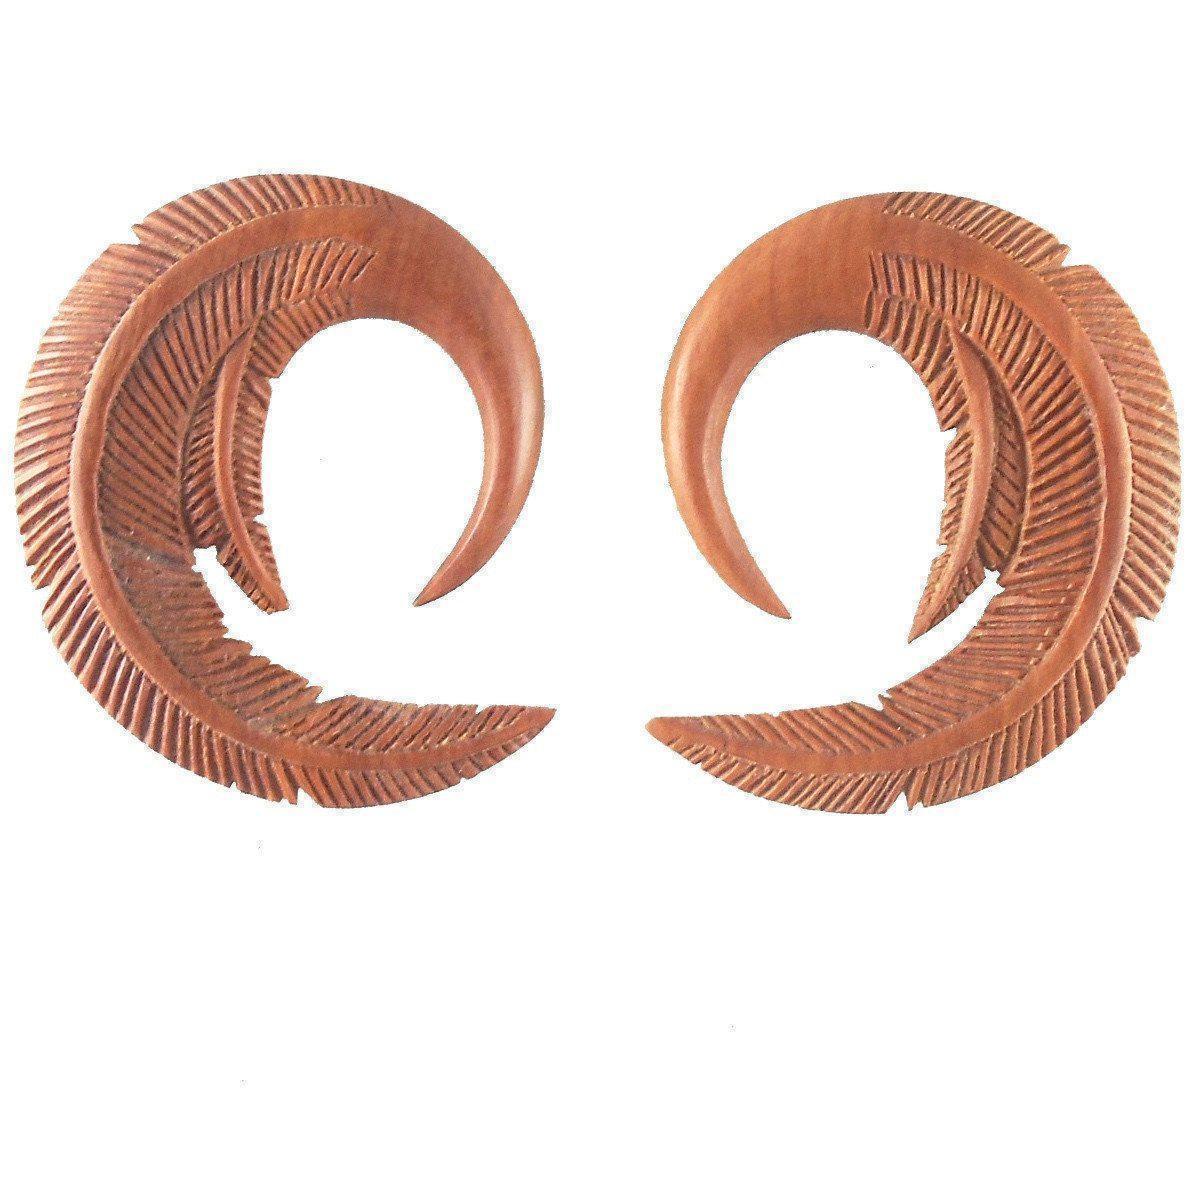 Gauges :|: Feather. 2 gauge Sapote Wood Earrings. 1 3/4 inch W X 2 inch L | Wood Body Jewelry